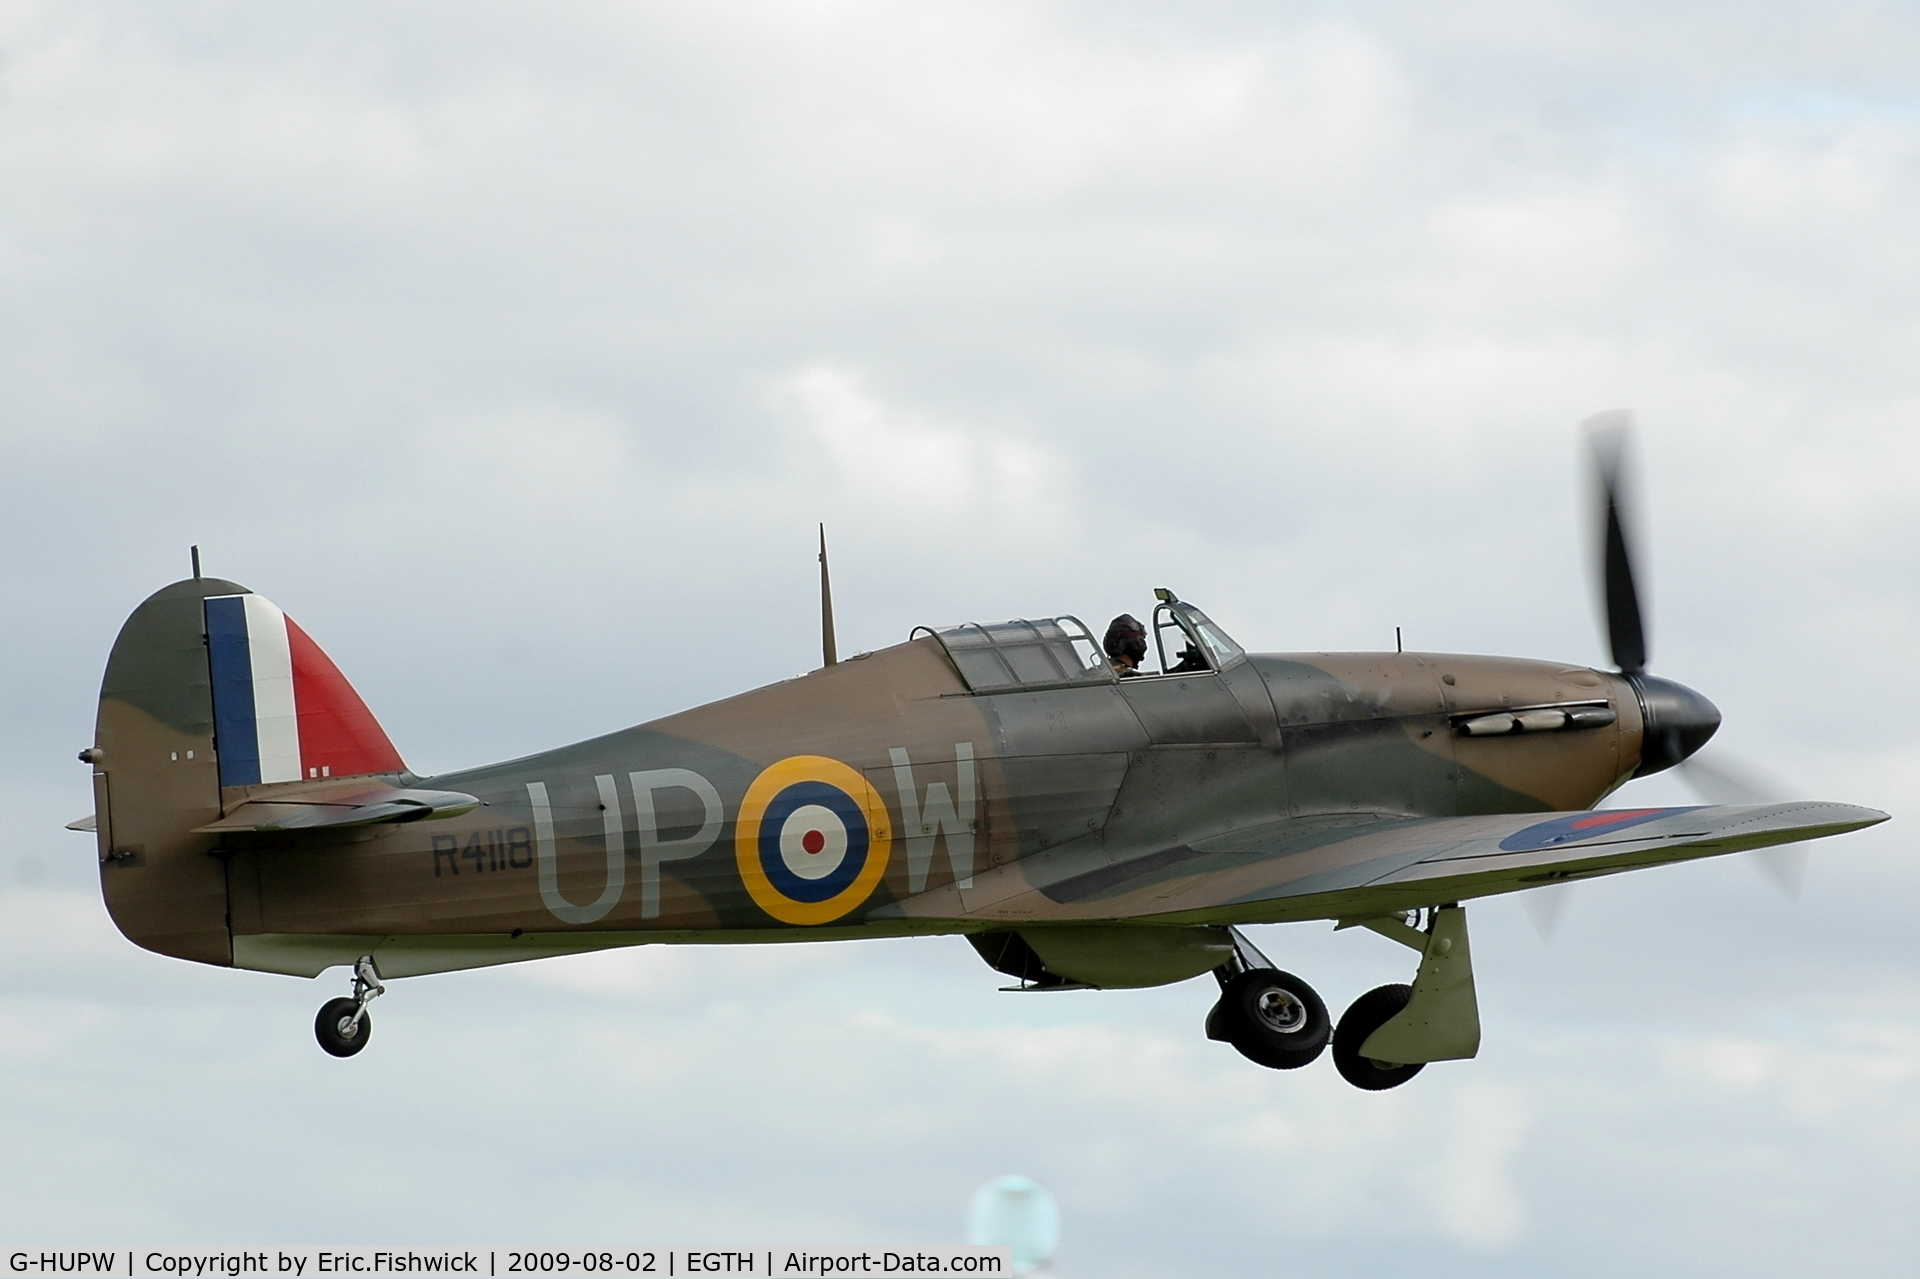 G-HUPW, 1940 Hawker Hurricane I C/N G592301, 42. R4118 departing Shuttleworth Military Pagent Air Display Aug 09